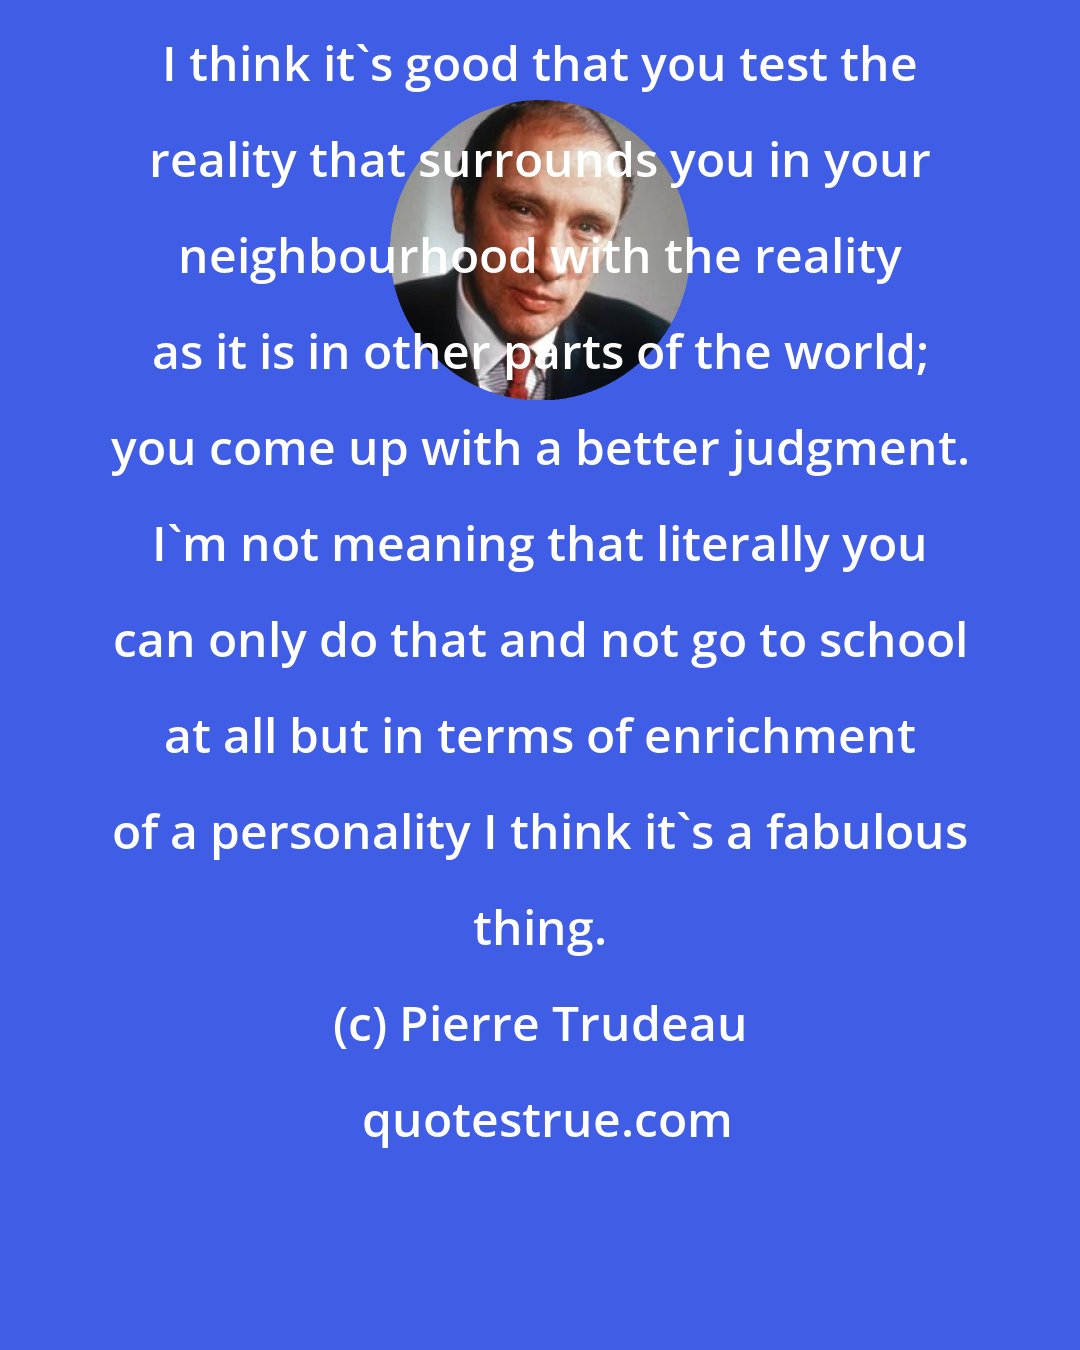 Pierre Trudeau: I think it's good that you test the reality that surrounds you in your neighbourhood with the reality as it is in other parts of the world; you come up with a better judgment. I'm not meaning that literally you can only do that and not go to school at all but in terms of enrichment of a personality I think it's a fabulous thing.